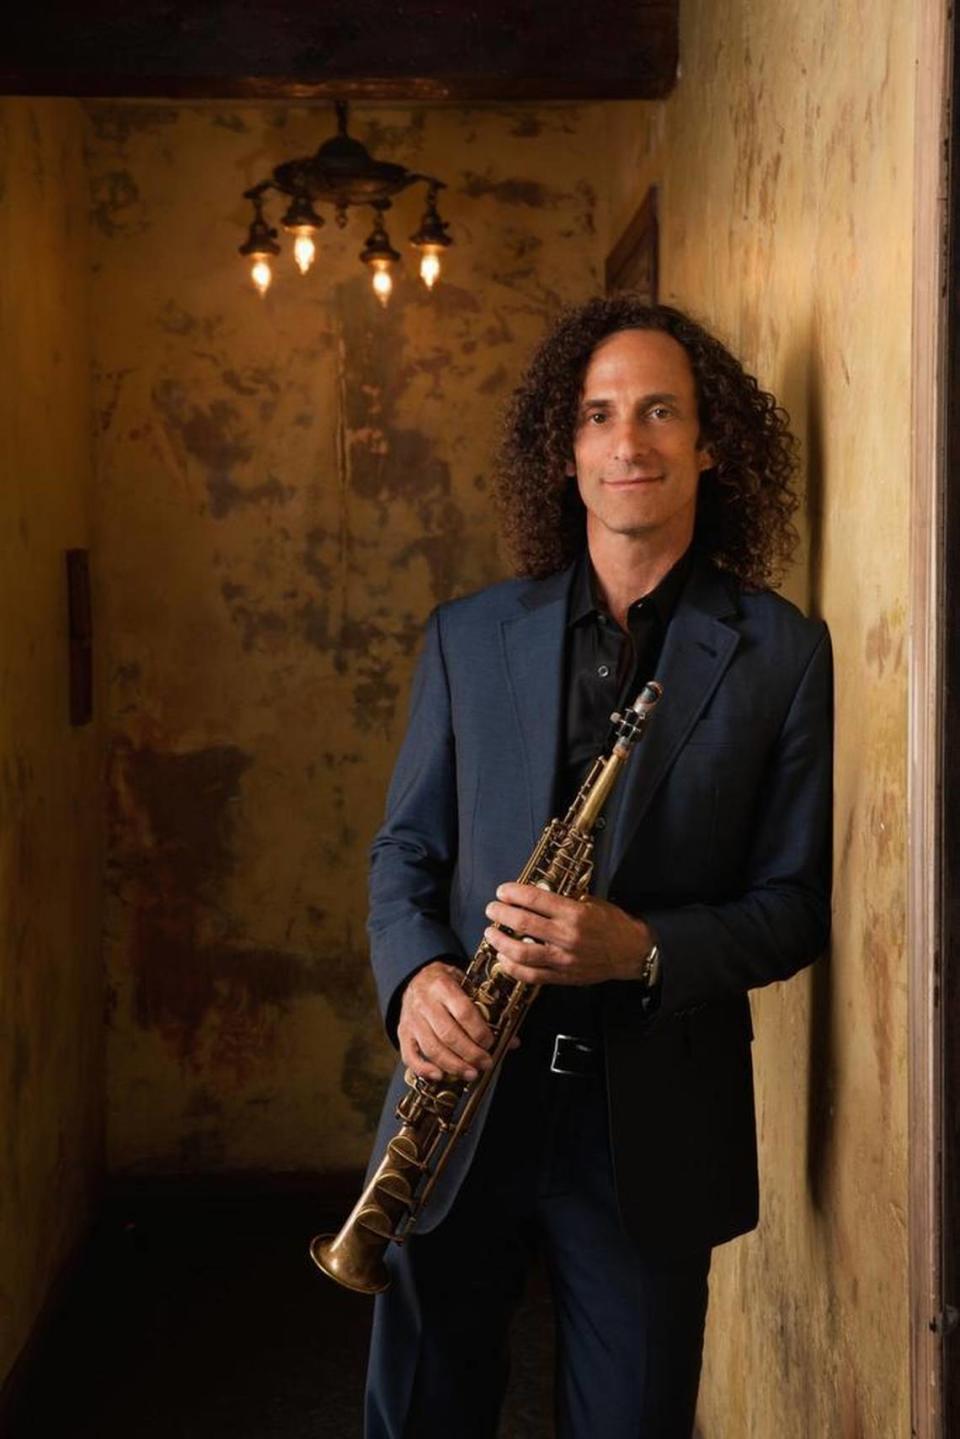 The famed saxophonist from Seattle, Kenny G.